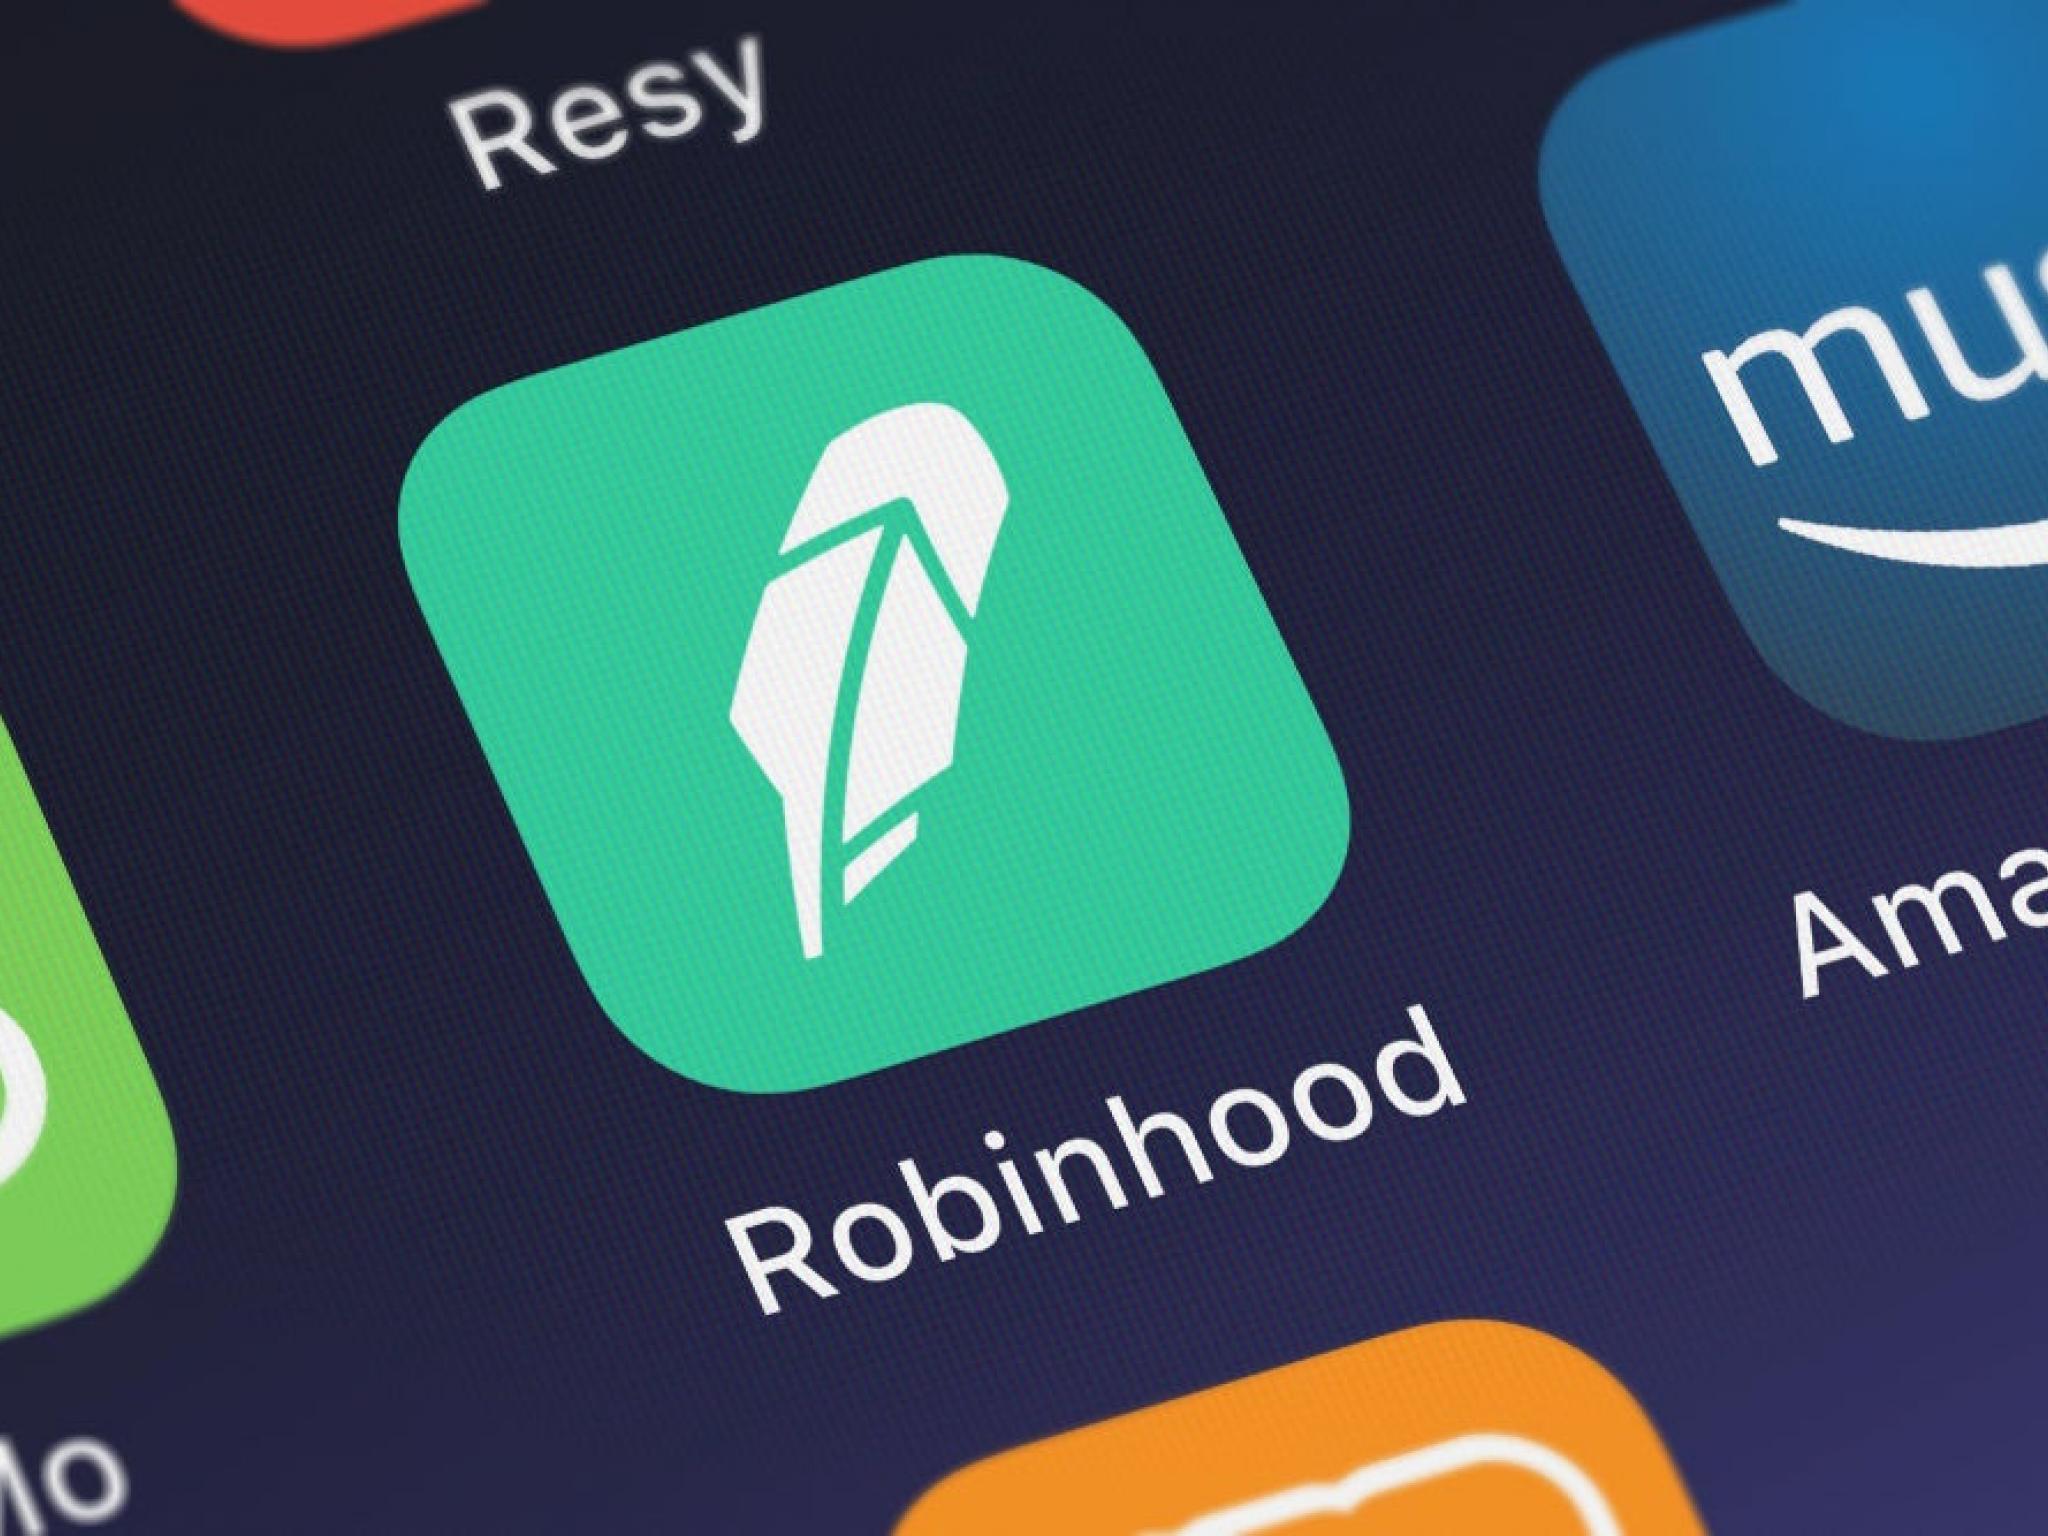  robinhood-reports-3x-jump-in-crypto-volume-executives-say-business-as-usual-despite-sec-well-notice 